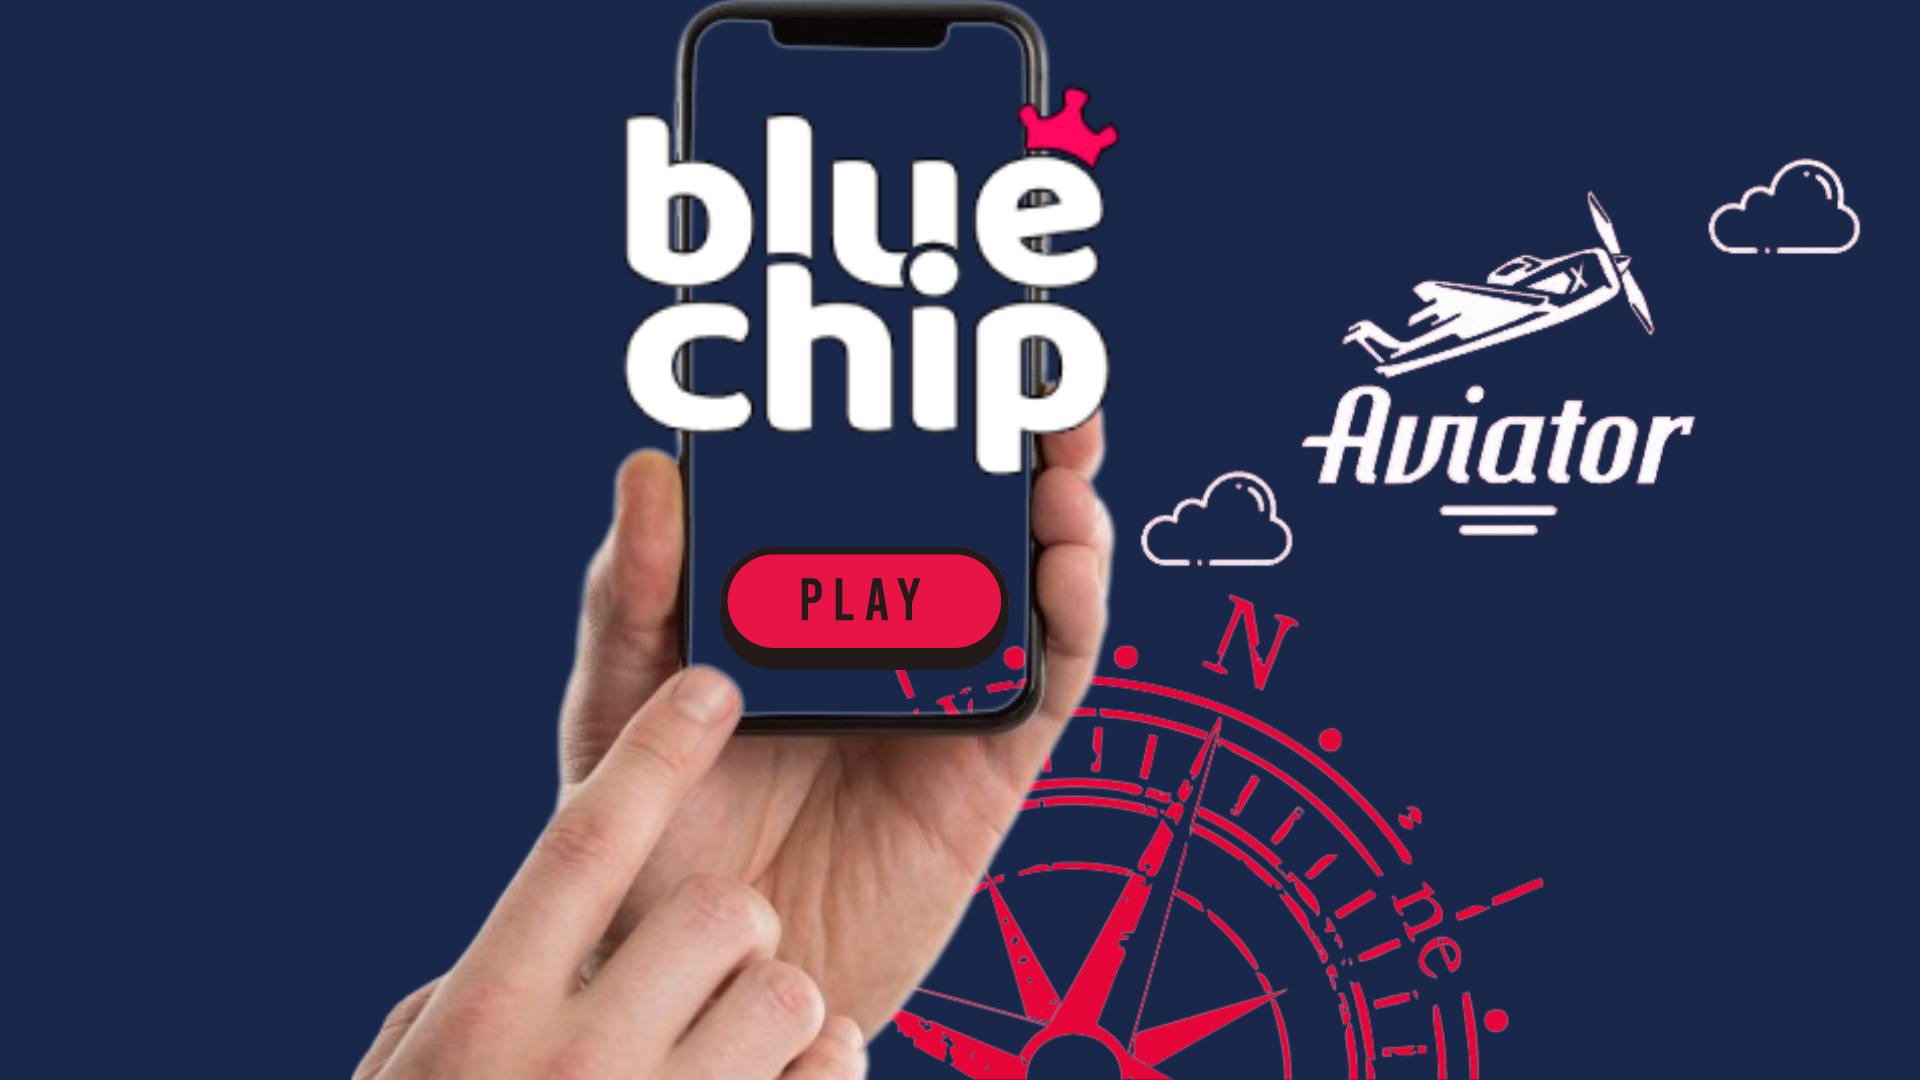 Logos of the Aviator game and BlueChip casino, and a hand holding phone